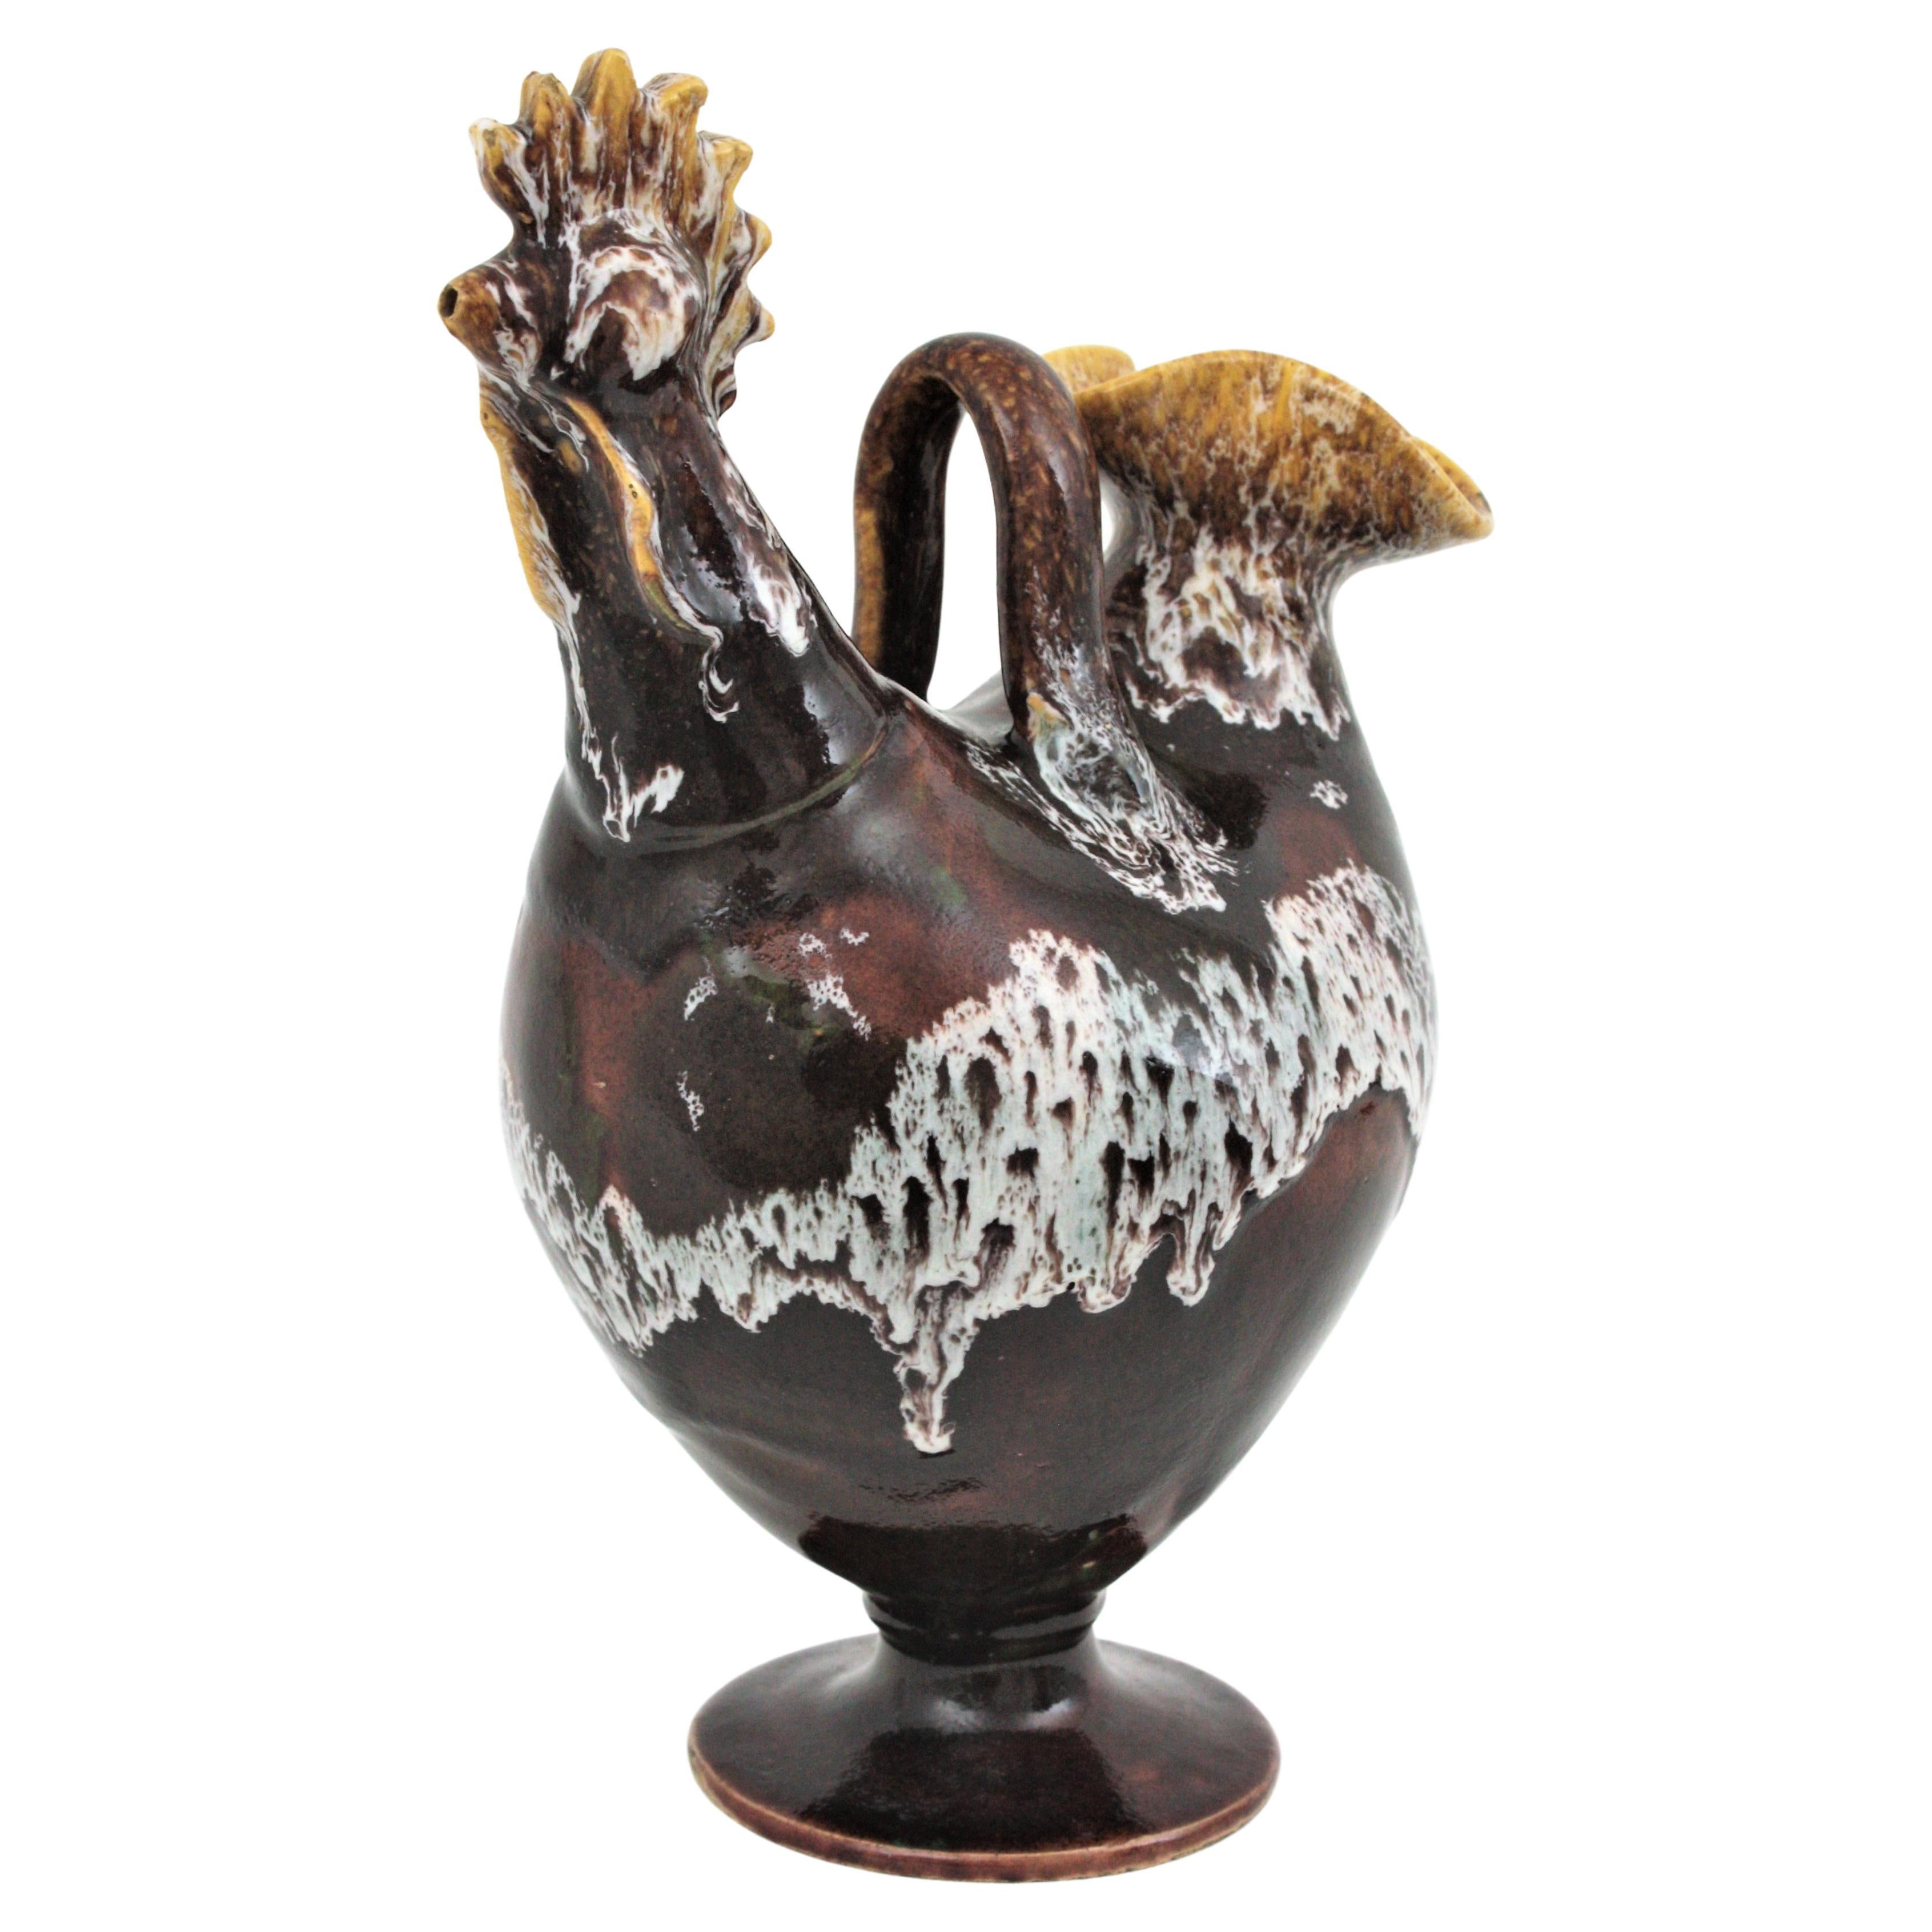 Spanish Rooster Shaped Pitcher in Brown Glazed Ceramic, 1960s For Sale